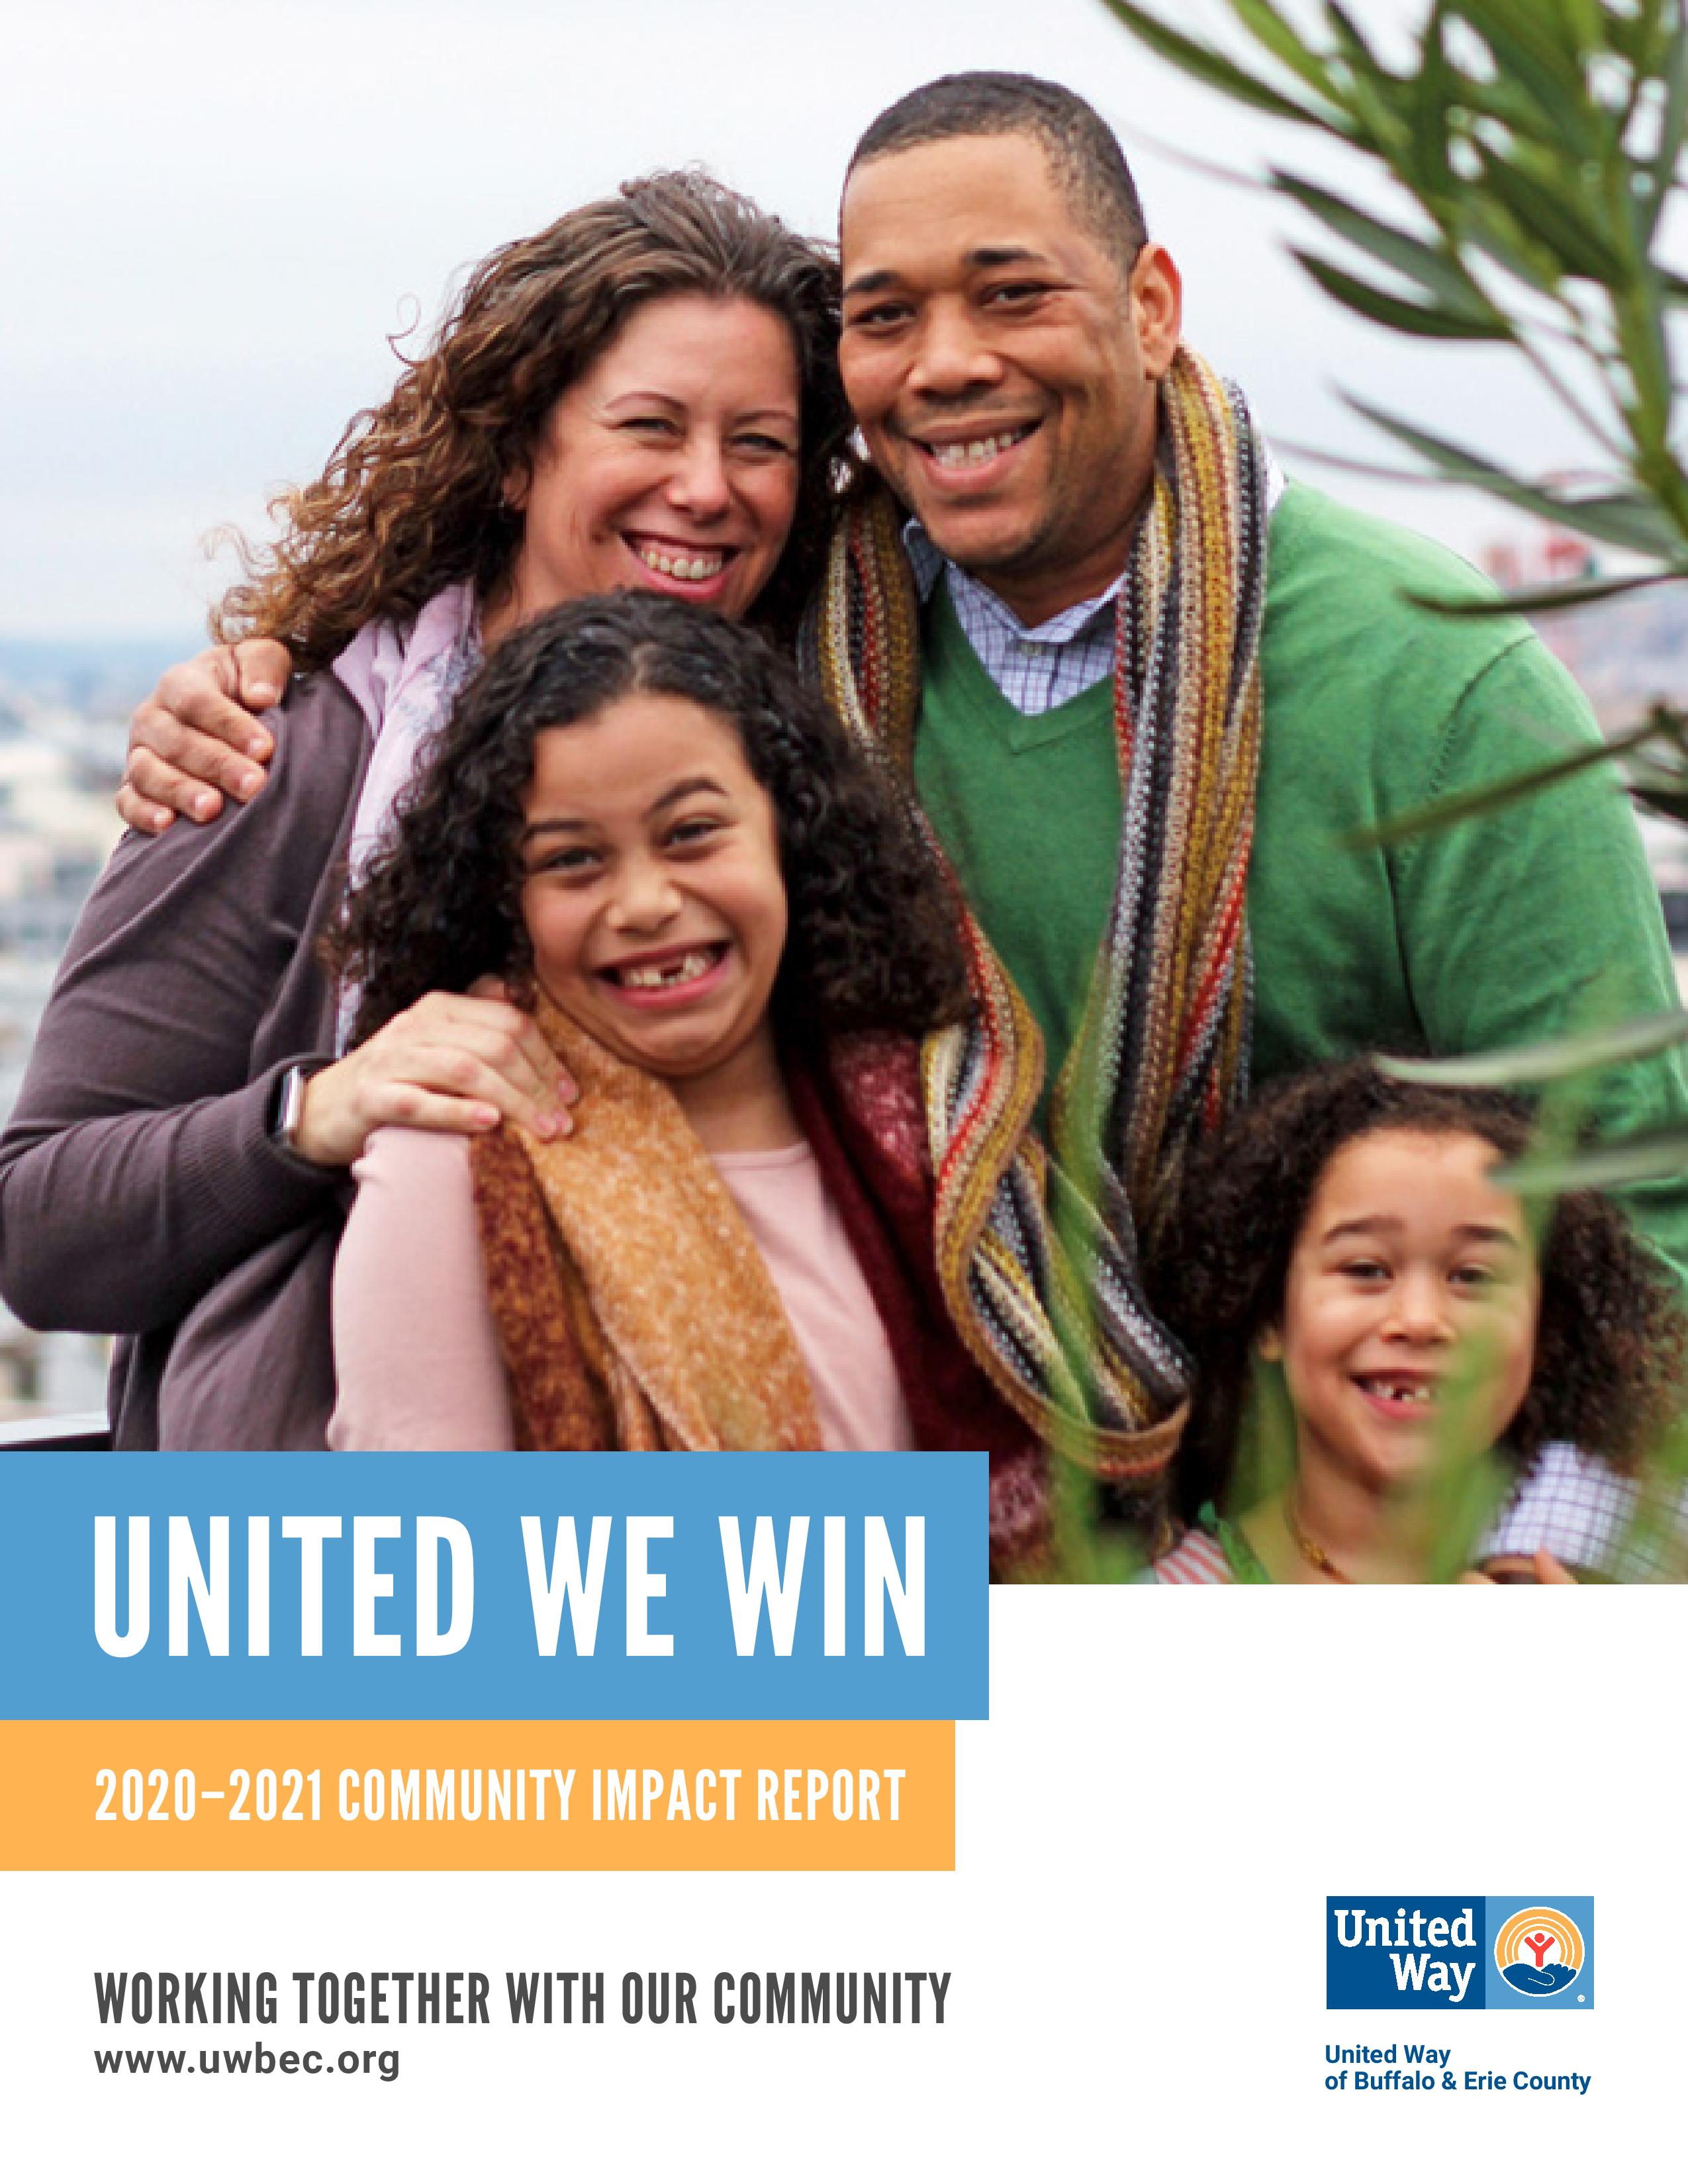 Our 2020-2021 Community Impact Report